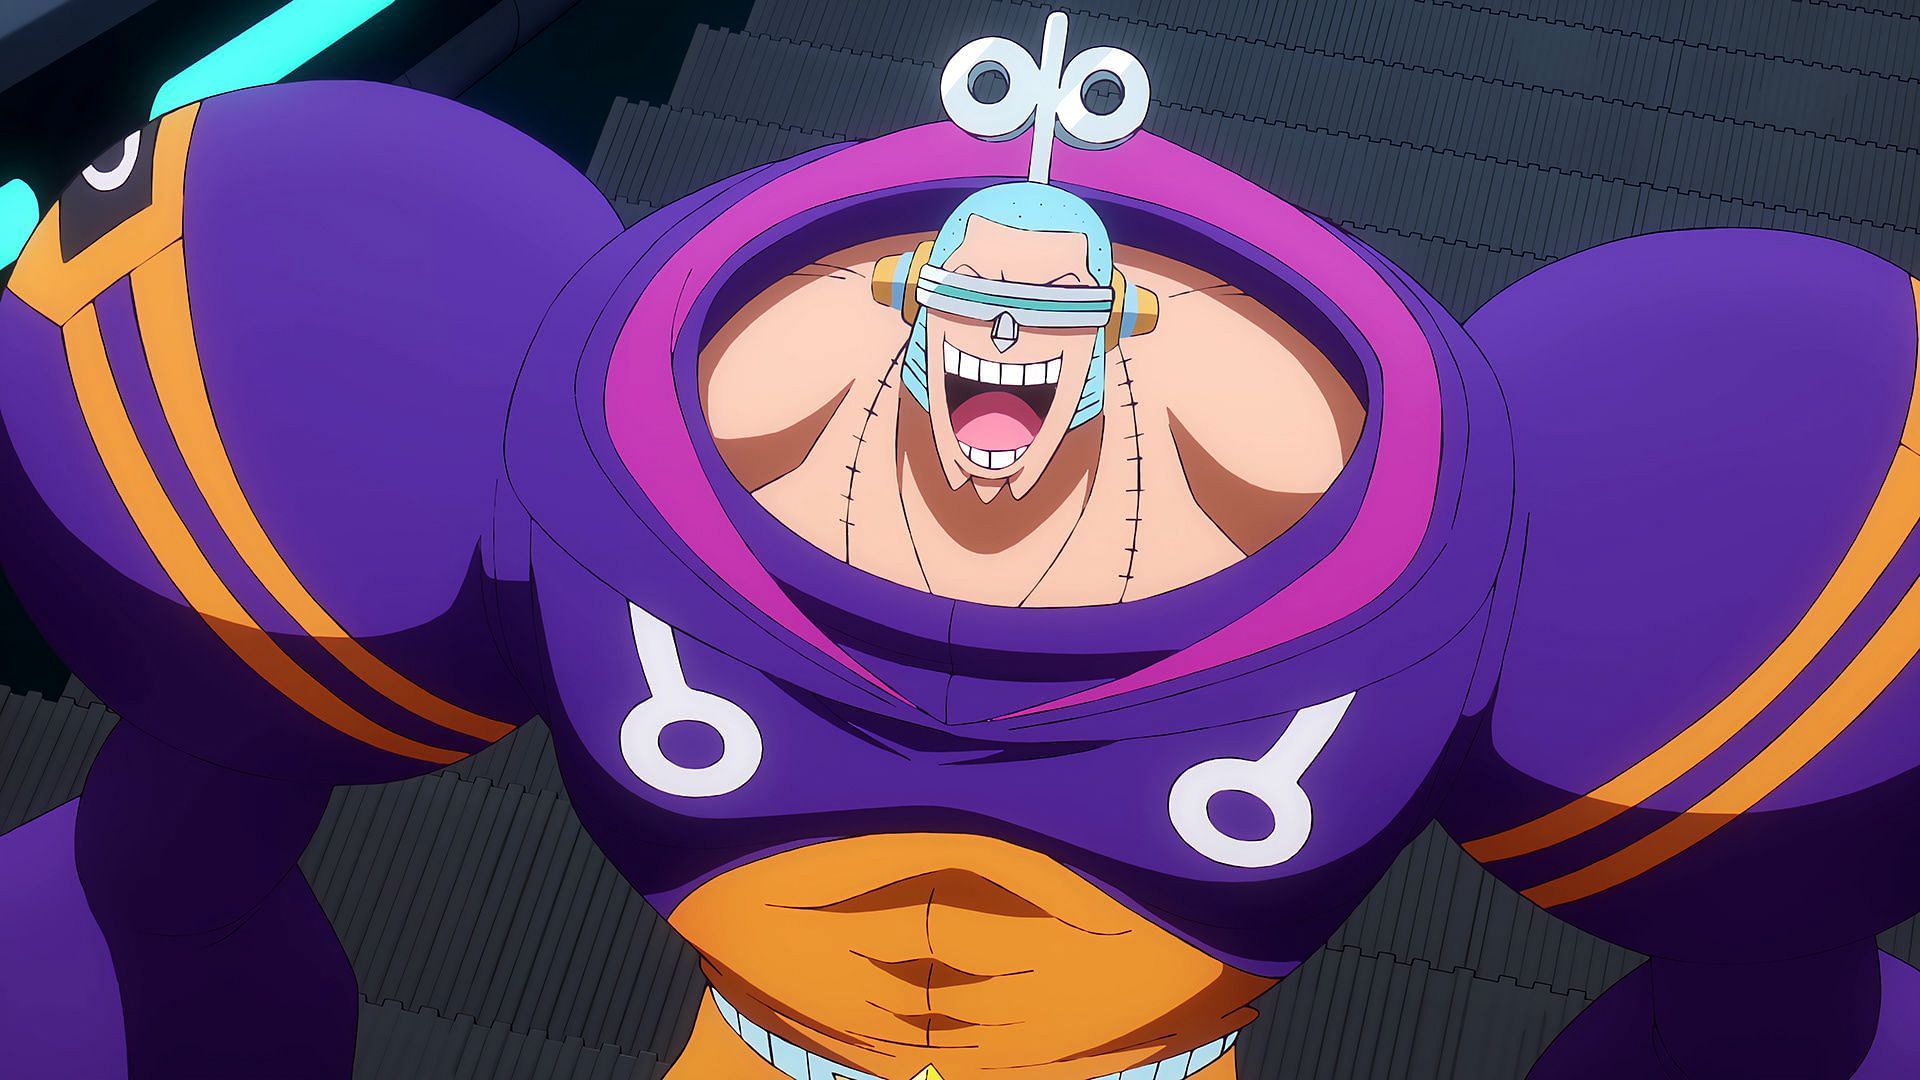 Franky as seen in the One Piece anime (Image via Toei Animation)